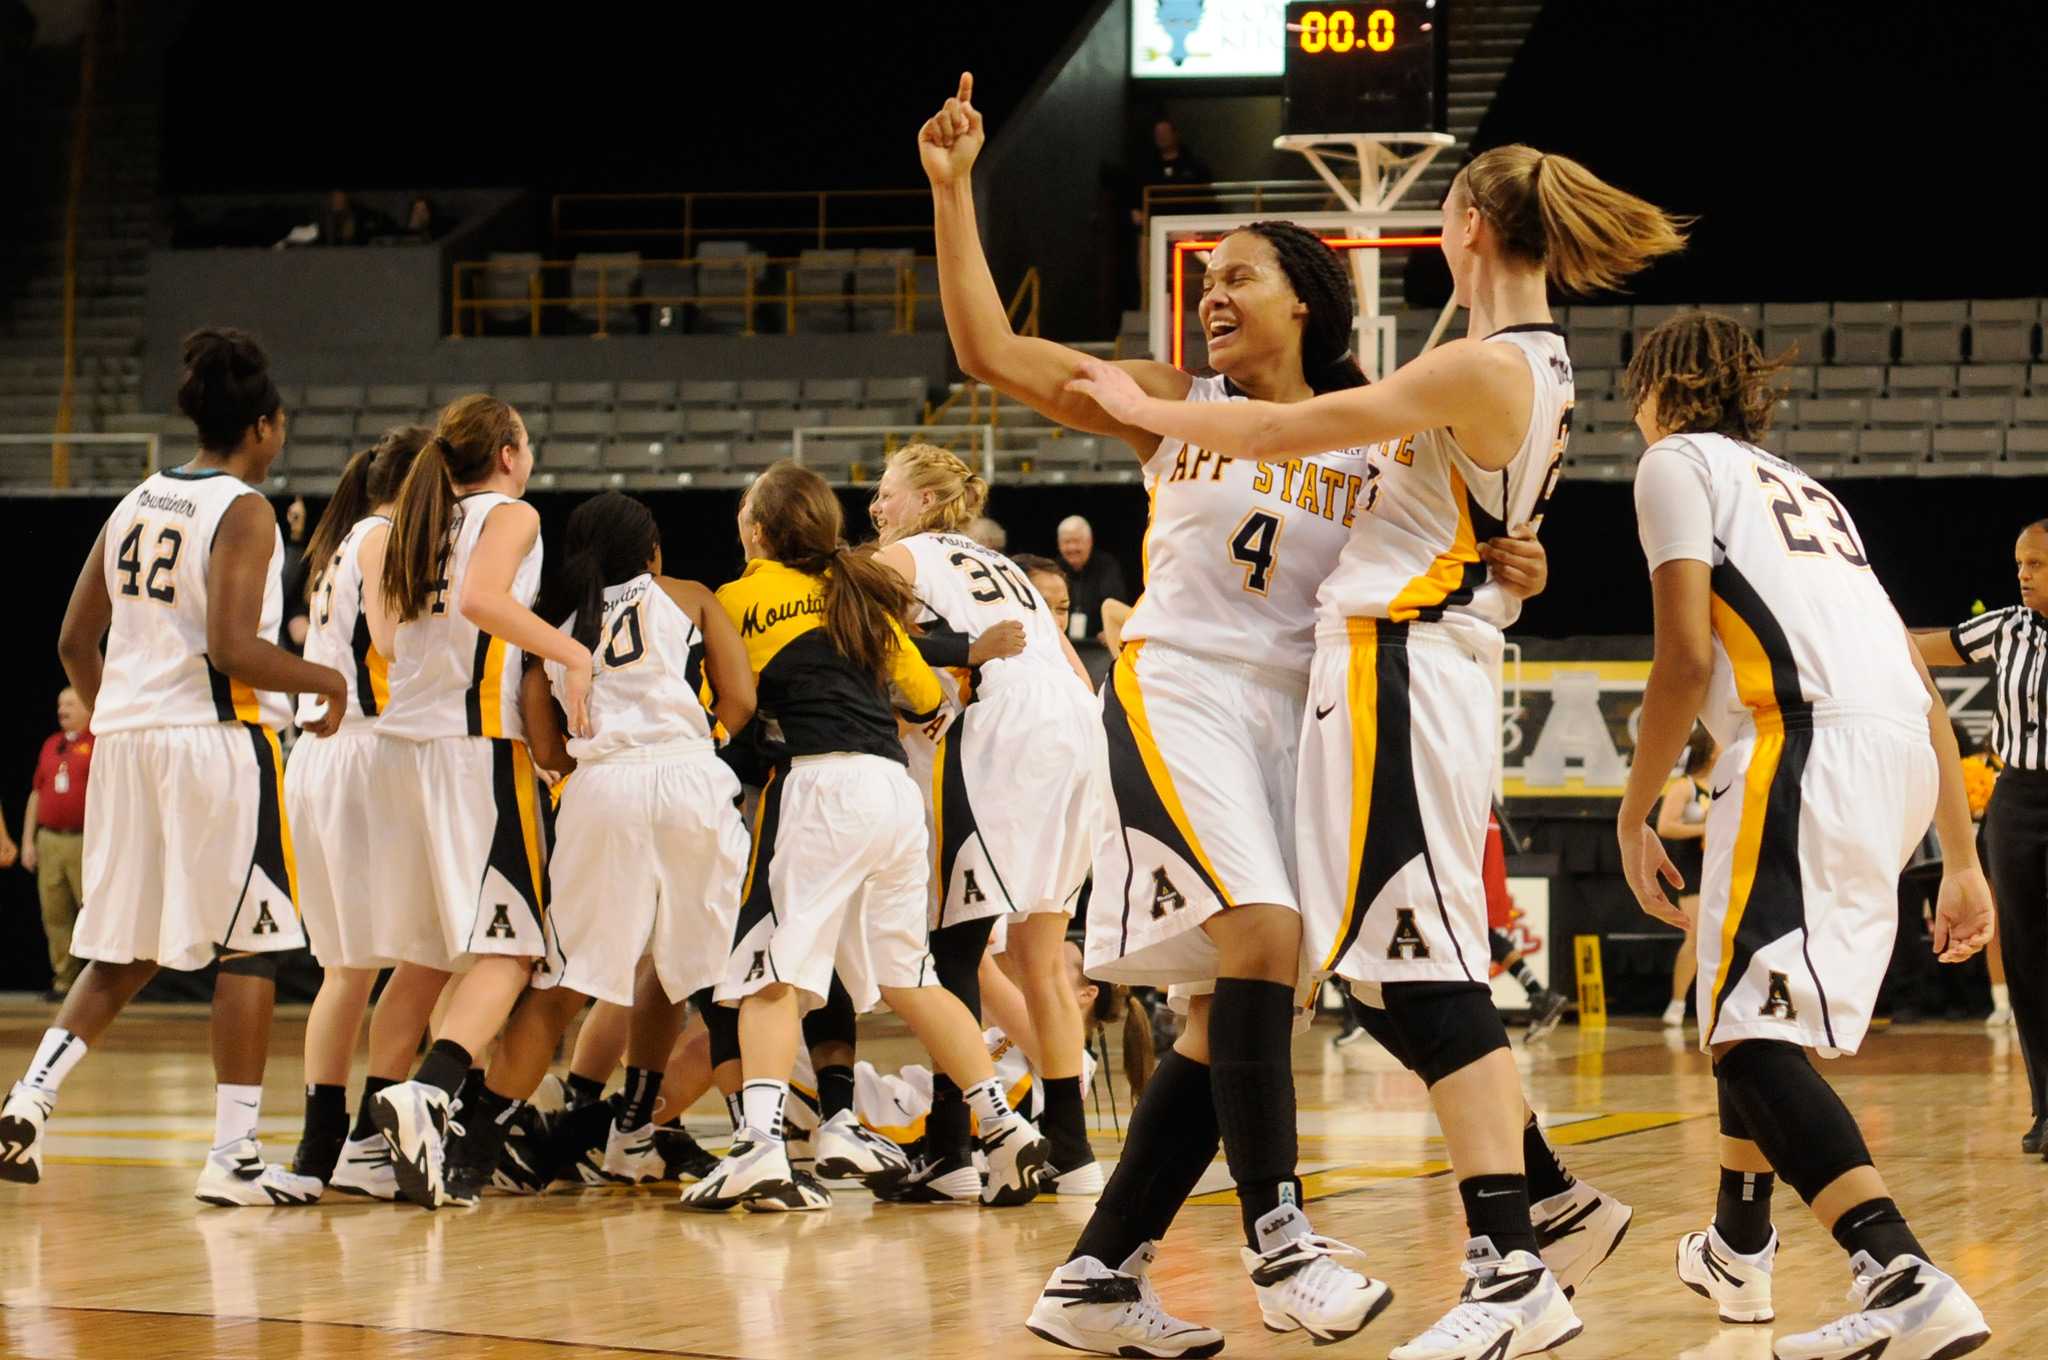 App State women's basketball celebrates after their home win over Arkansas State by a final score of 70-69. Justin Perry | The Appalachian